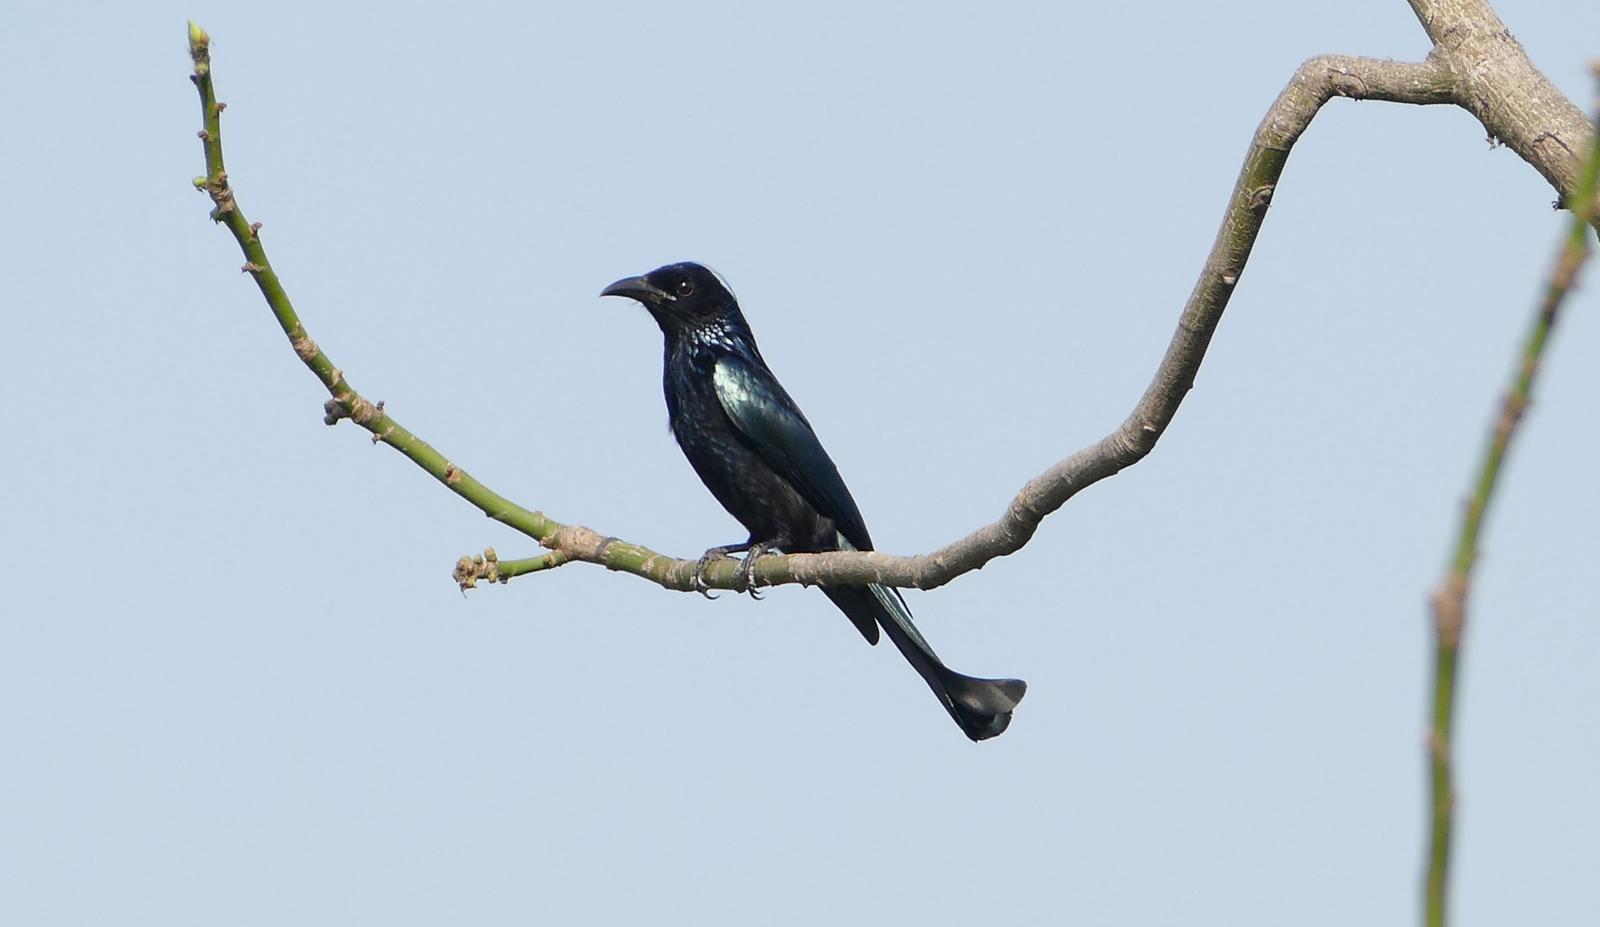 Hair-crested Drongo Photo by Randy Siebert